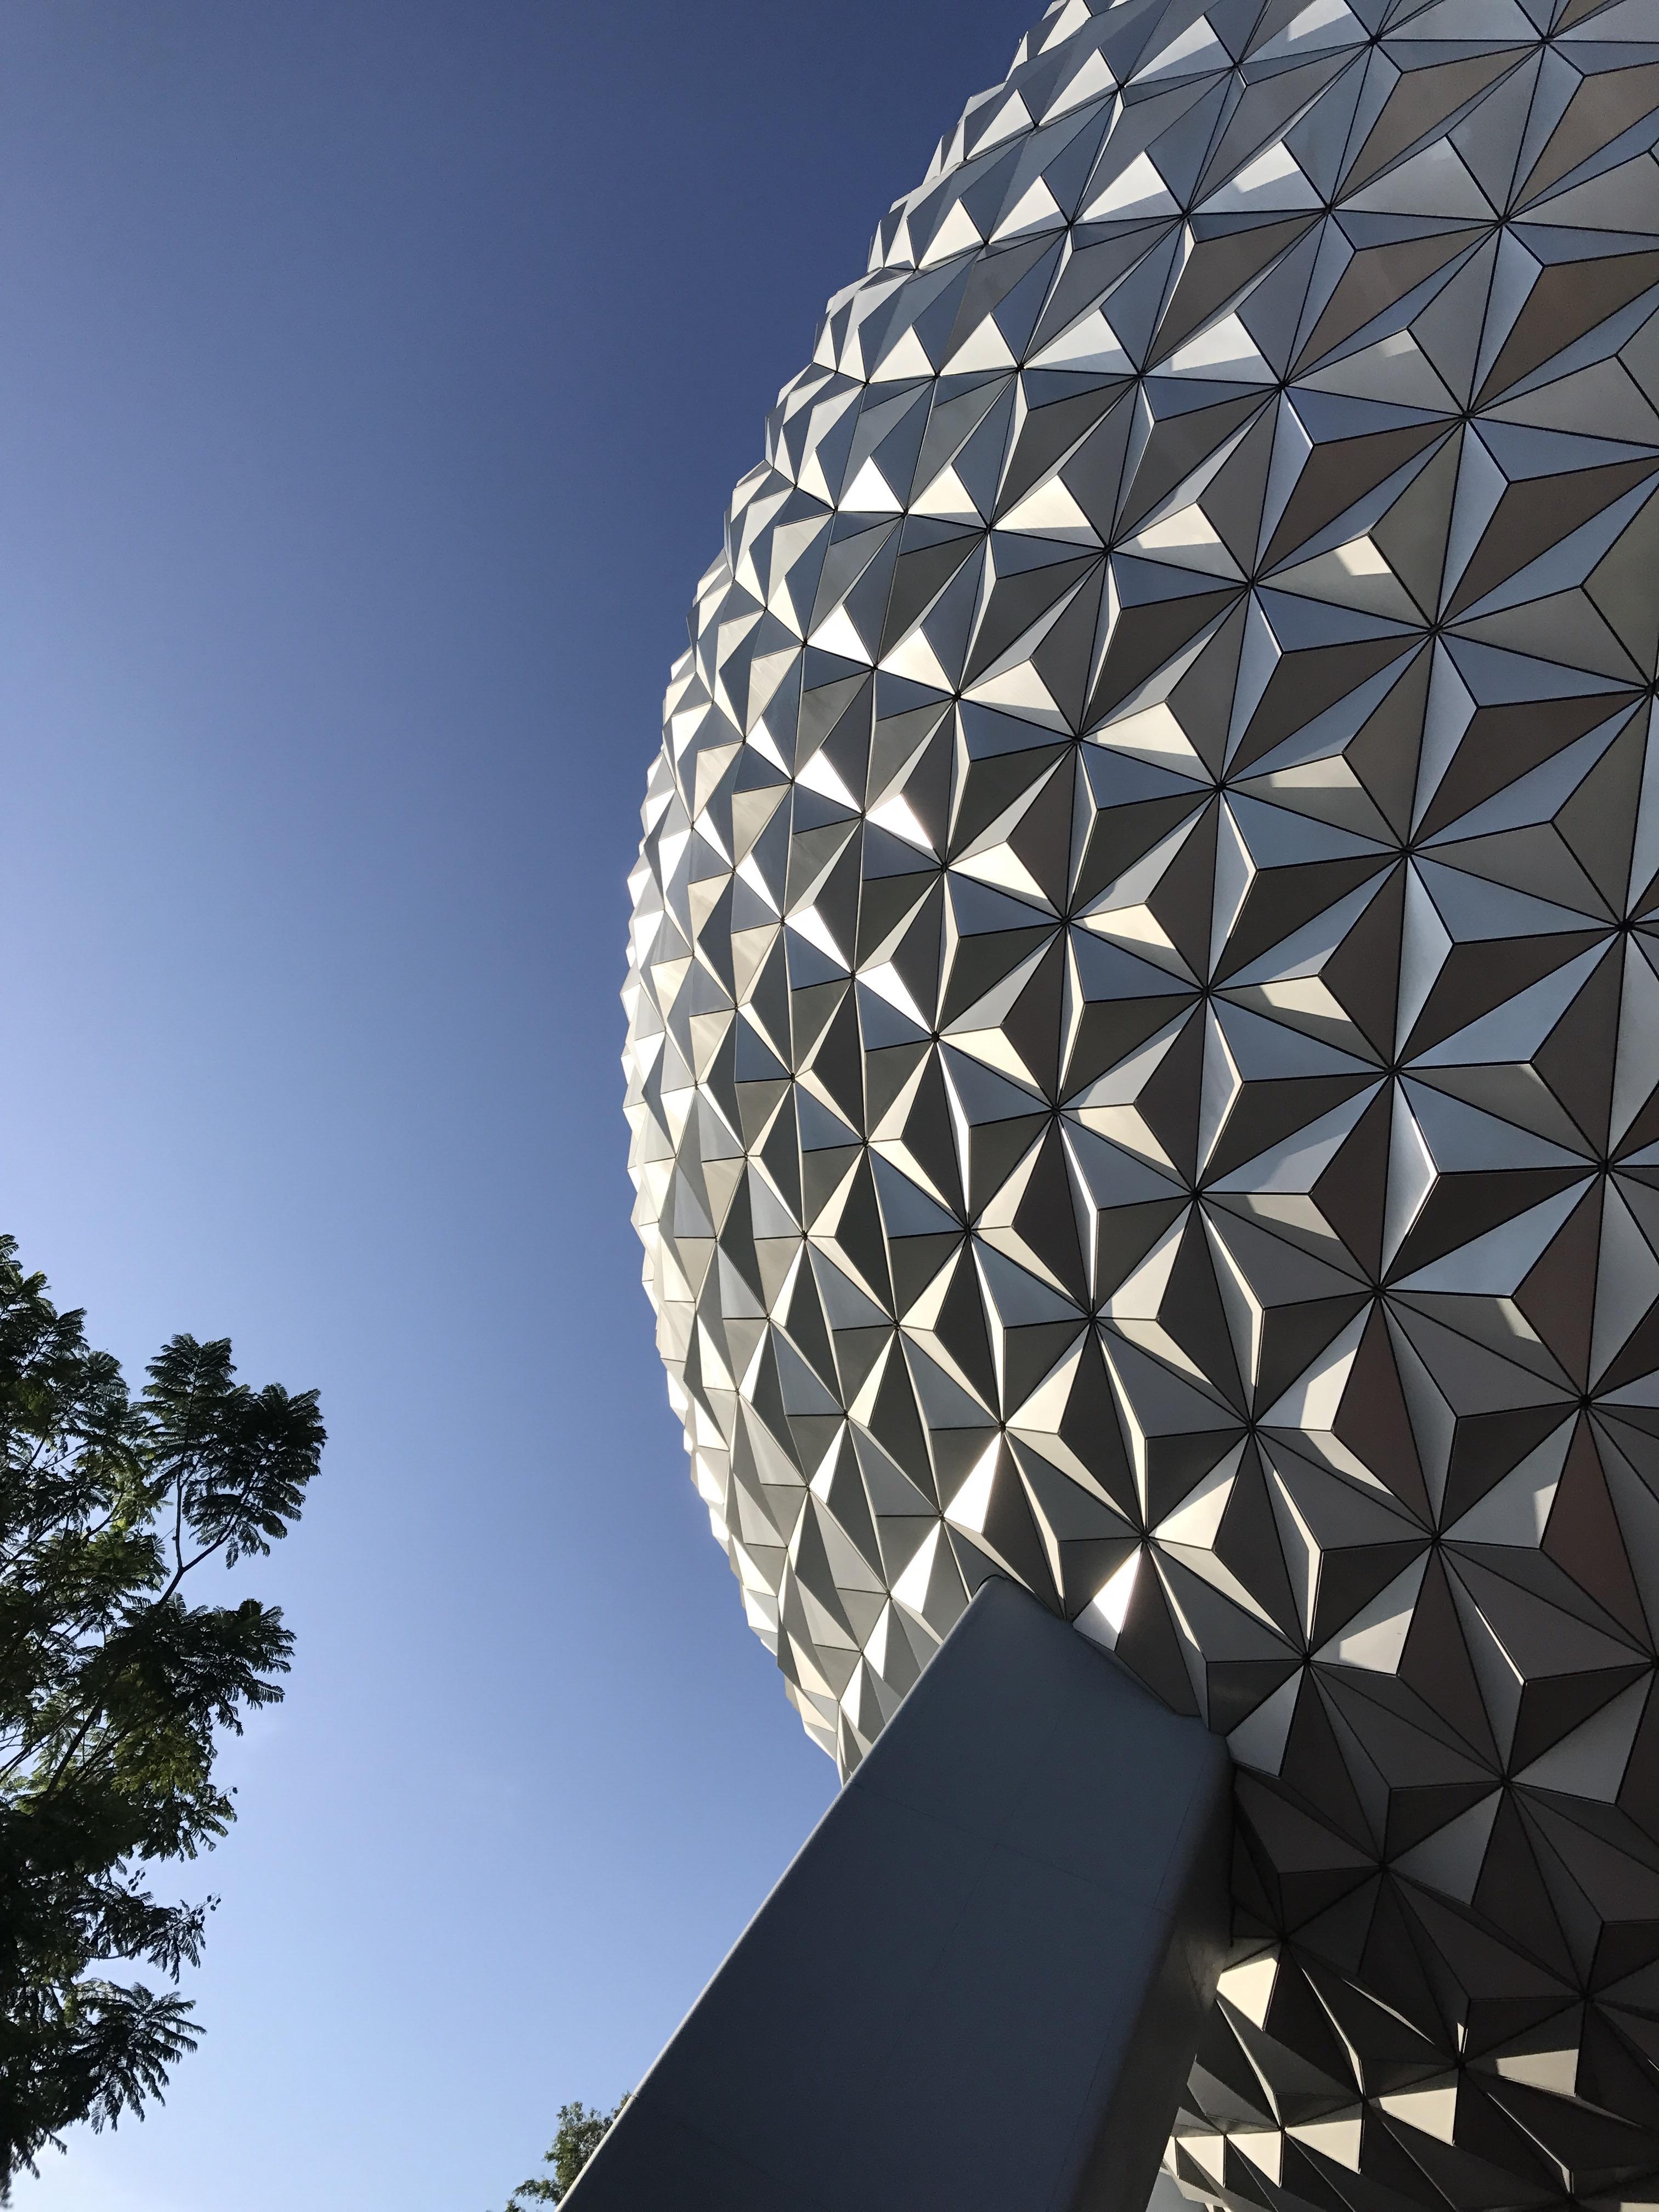 Photoepcot iPhone Wallpaper I Took This Morning World